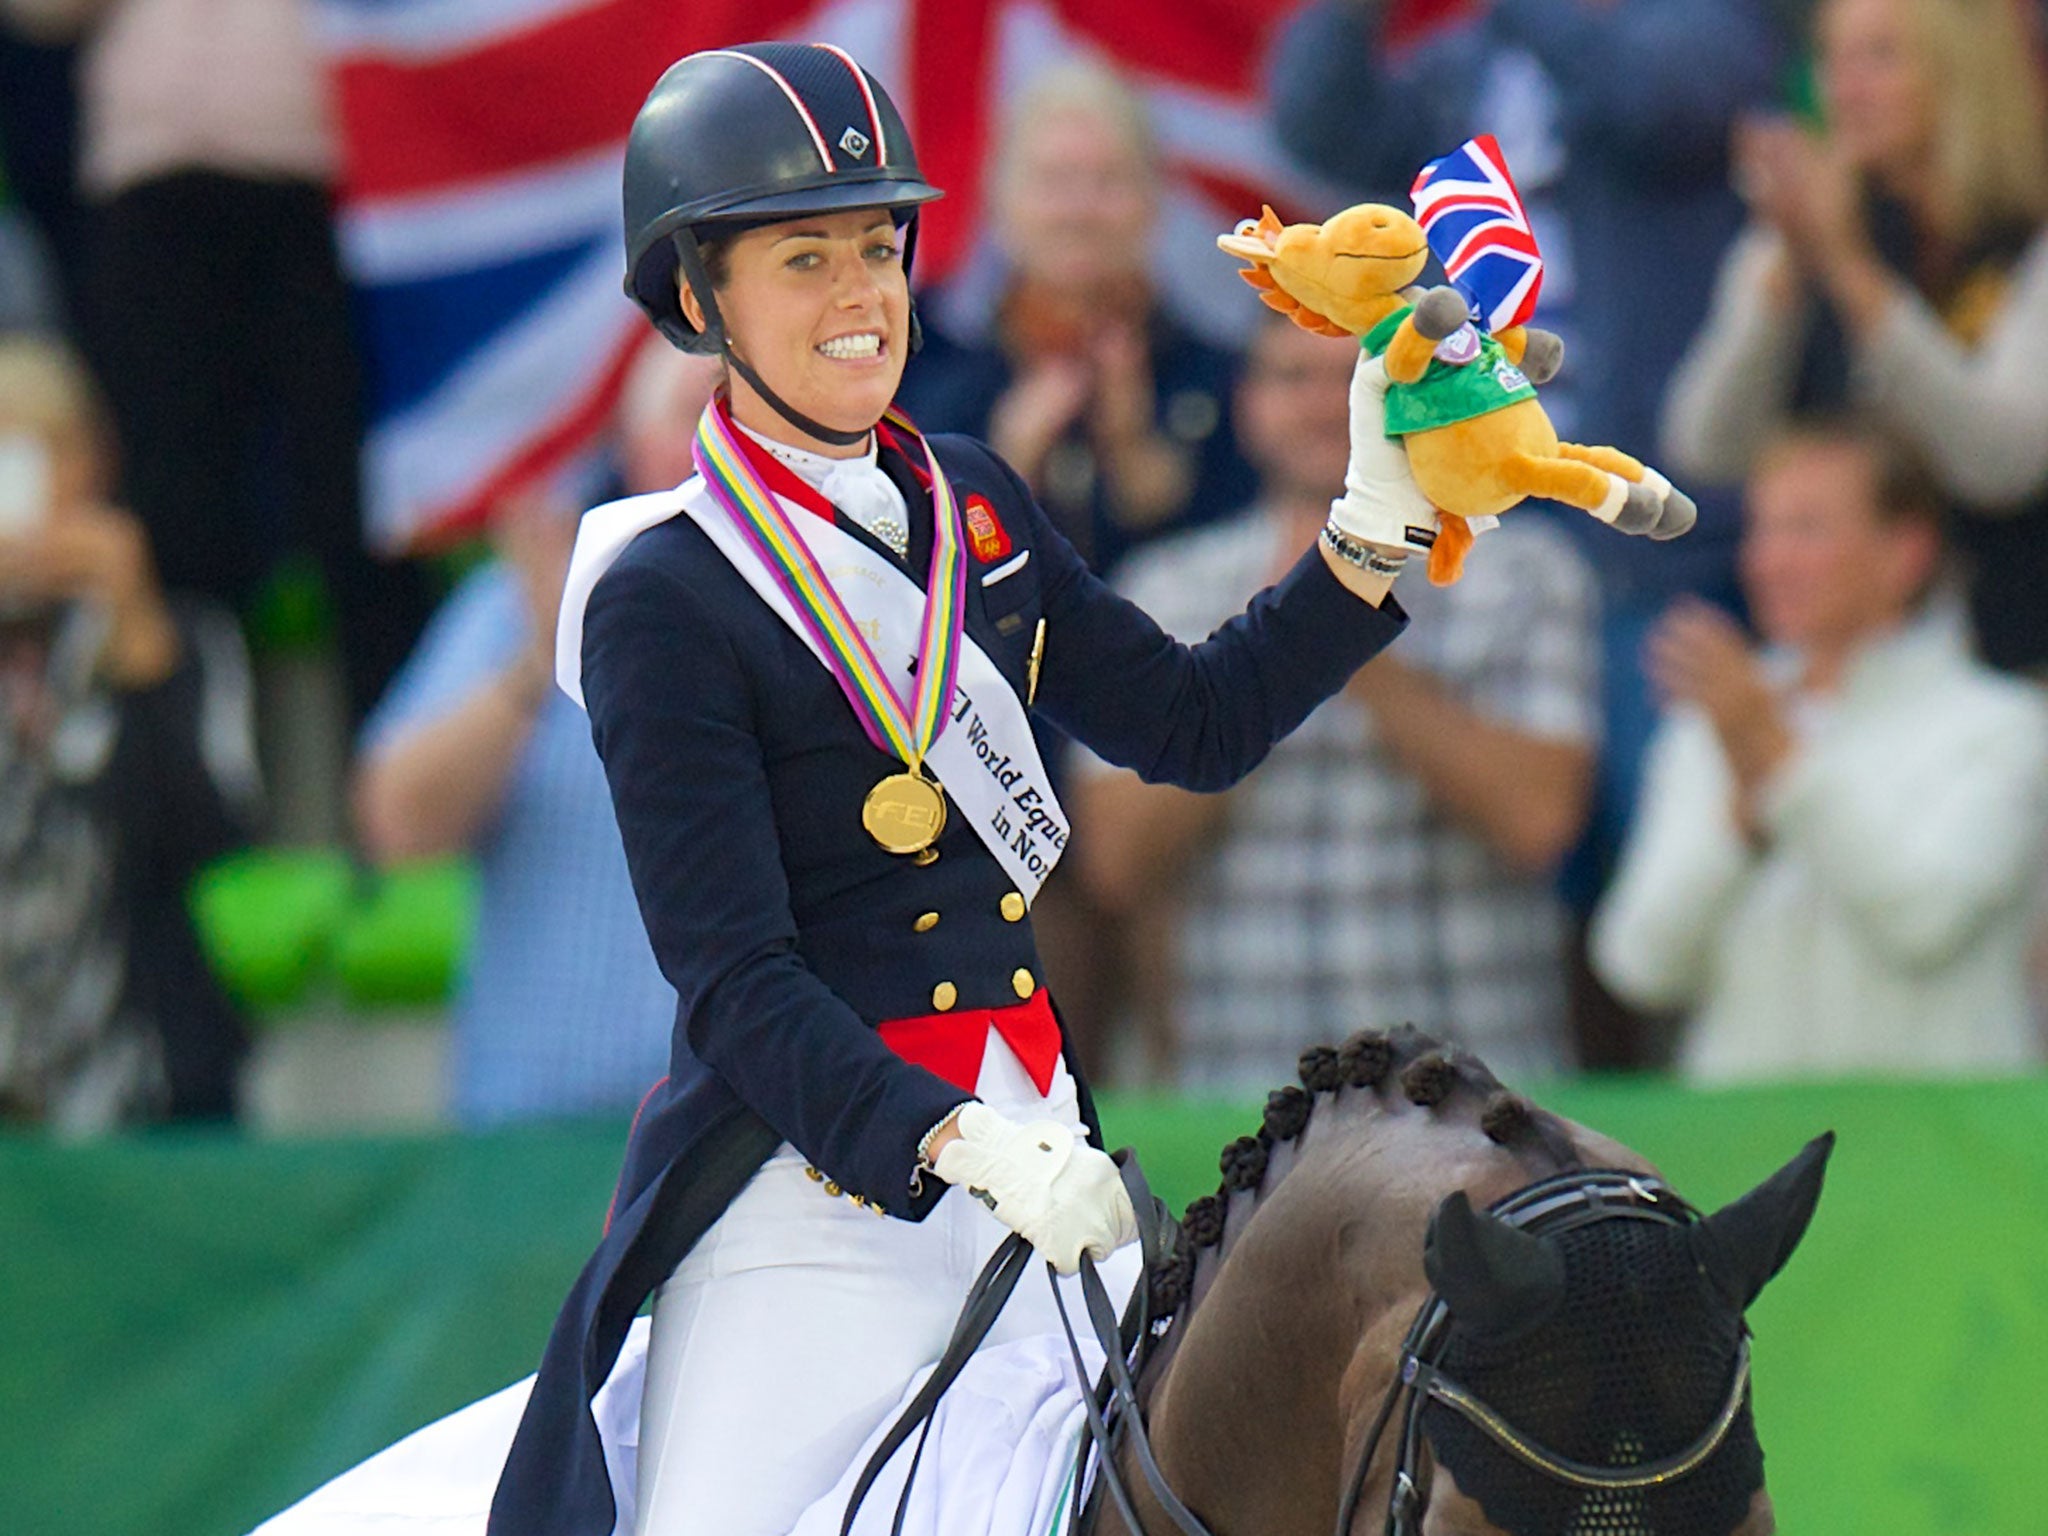 Charlotte Dujardin at the World Equestrian Games